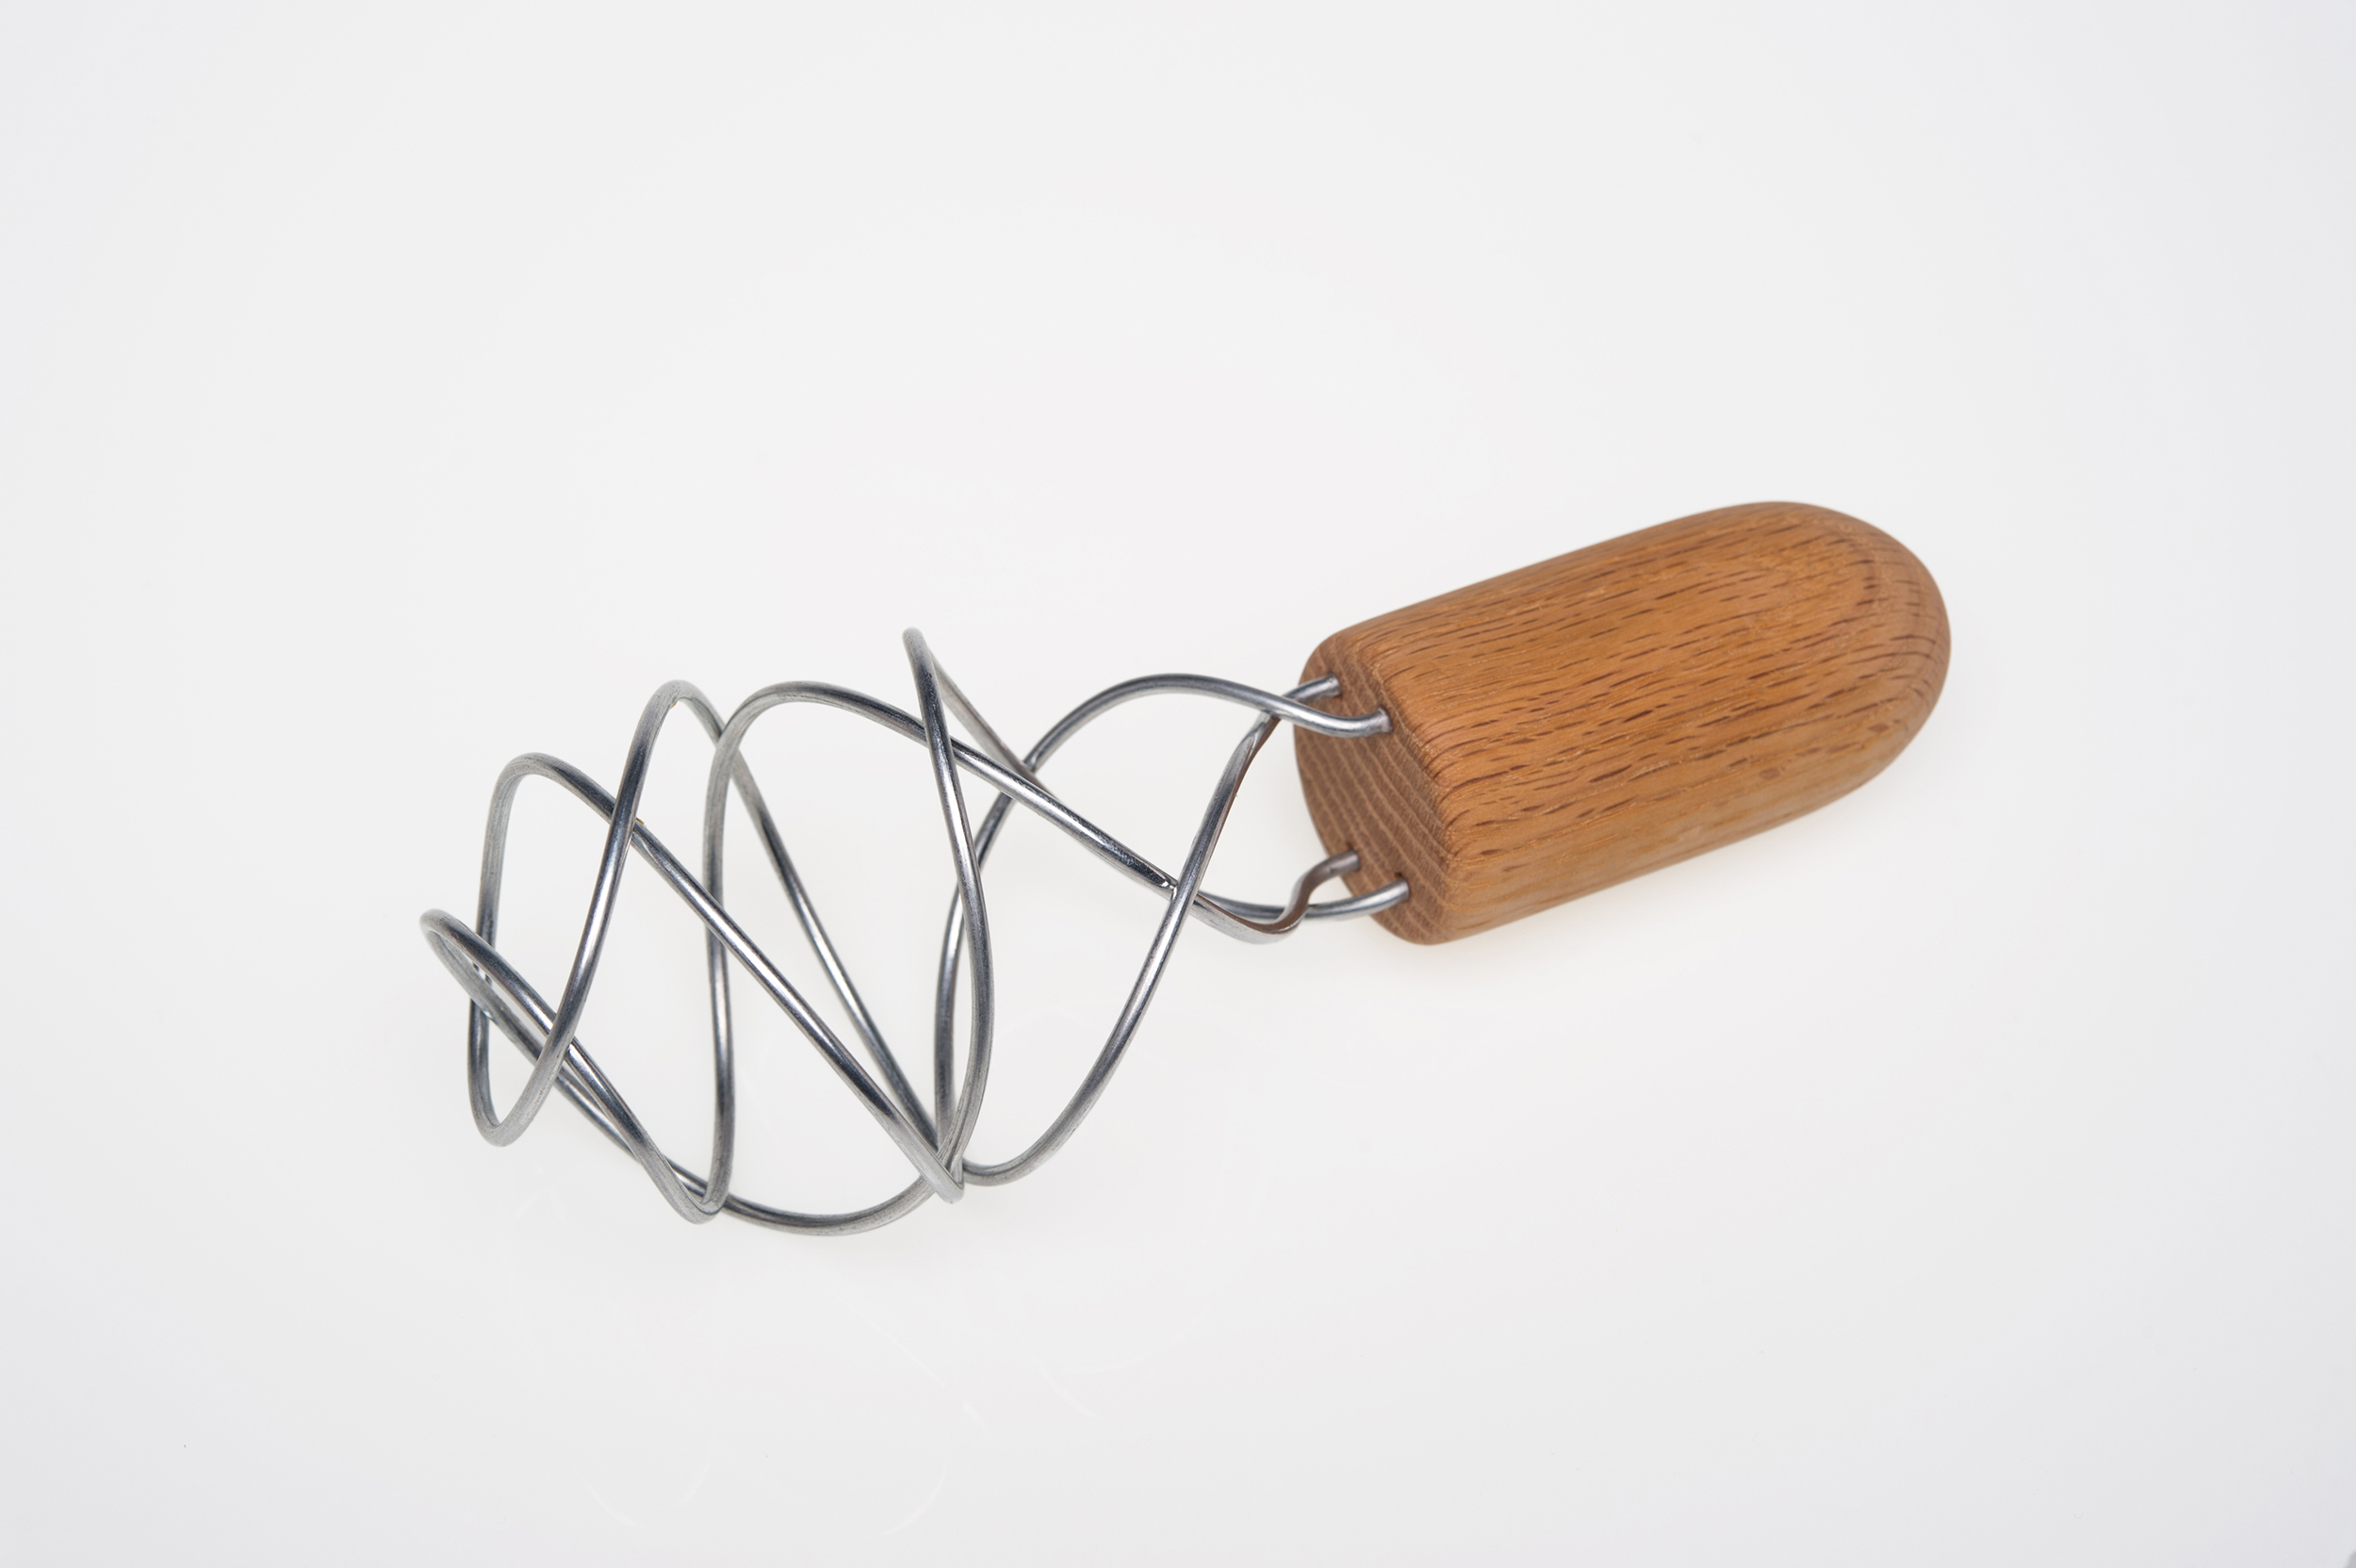 A wooden-handled whisk